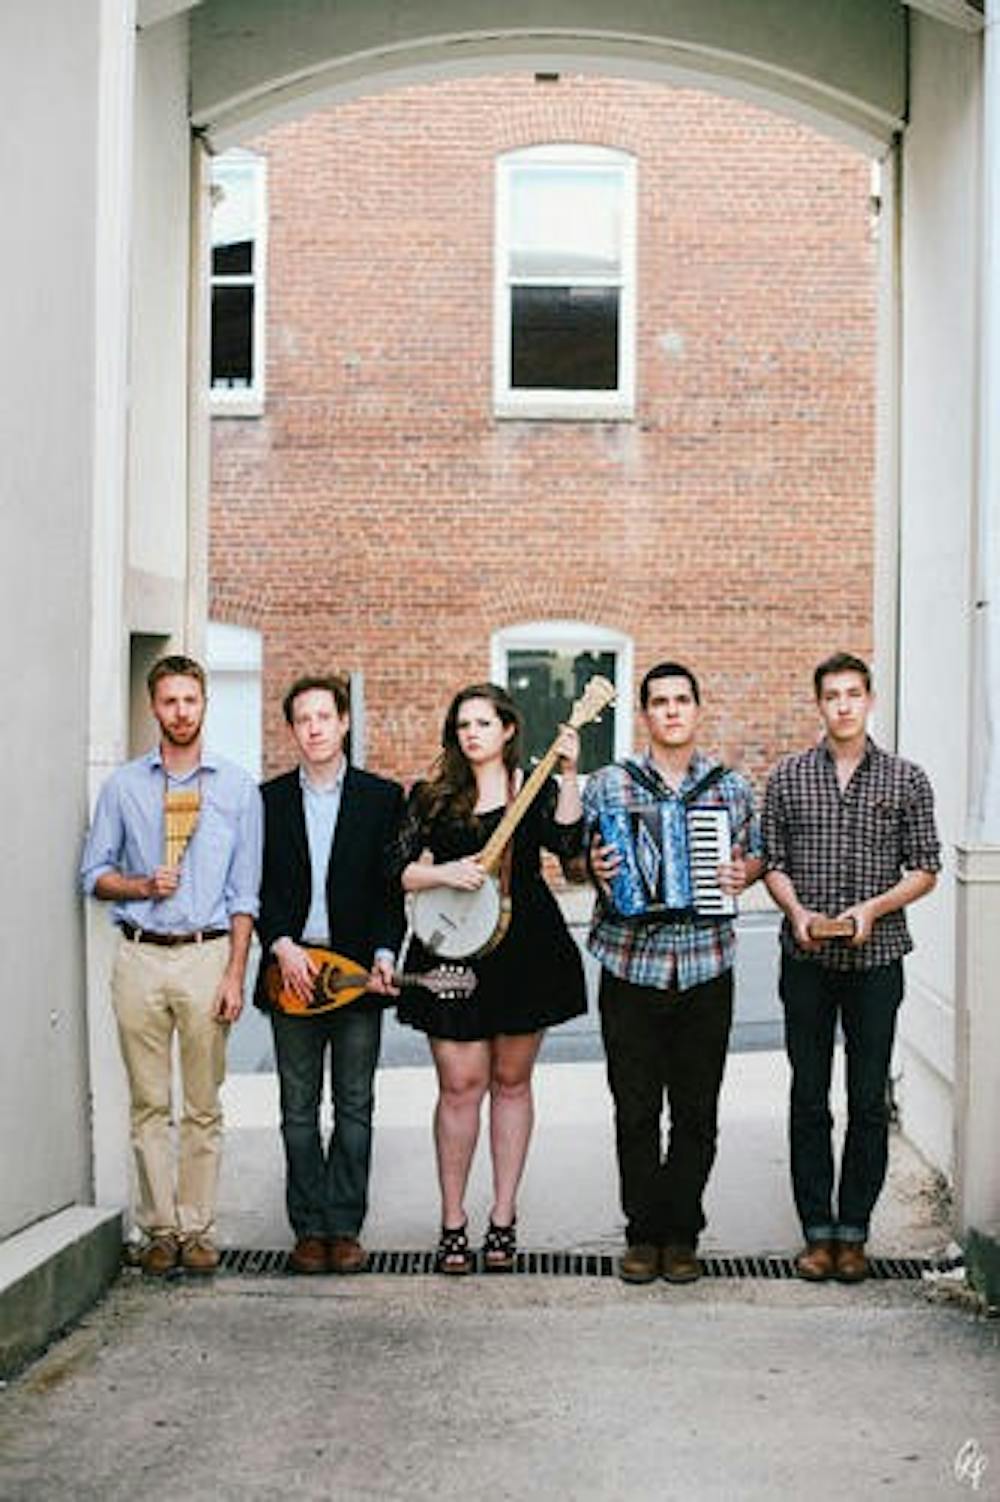 <p>University Alumna&nbsp;Erin Lunsford&nbsp;and her four-man band will play a show at The Southern Tuesday.&nbsp;</p>